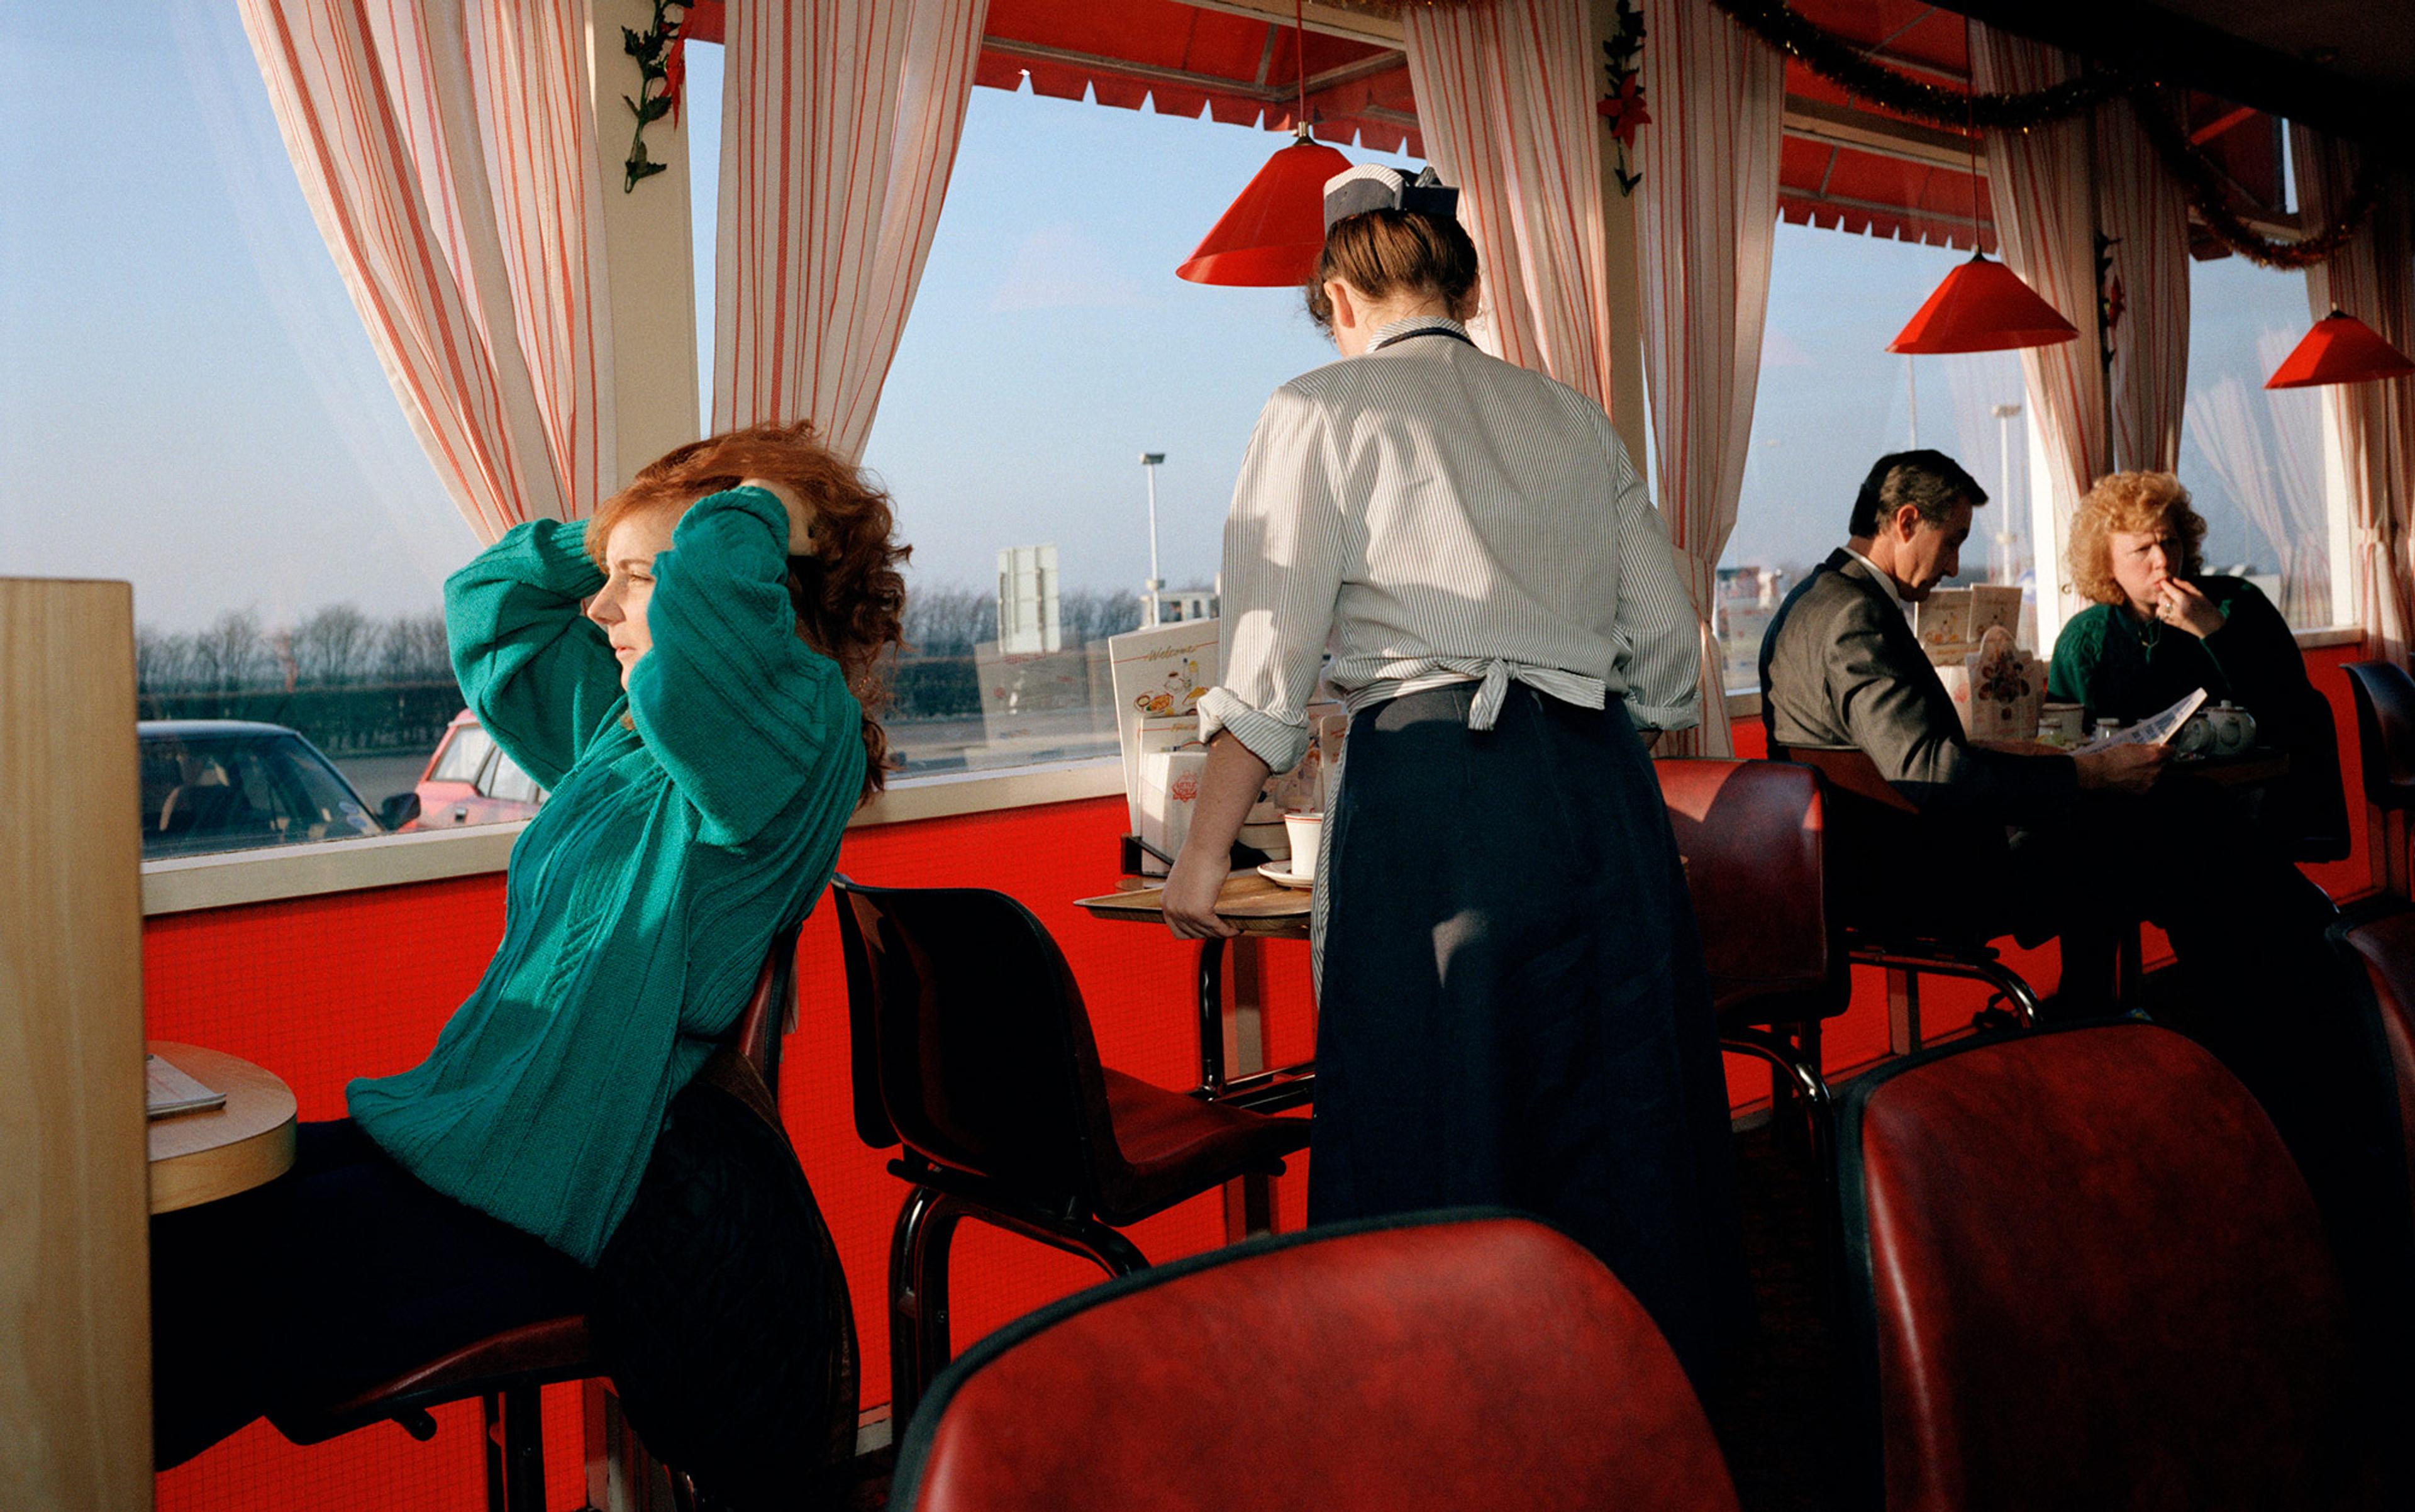 People seated in a diner with red accents, a waitress serving, and a woman in a green sweater sitting by the window adjusting her hair.